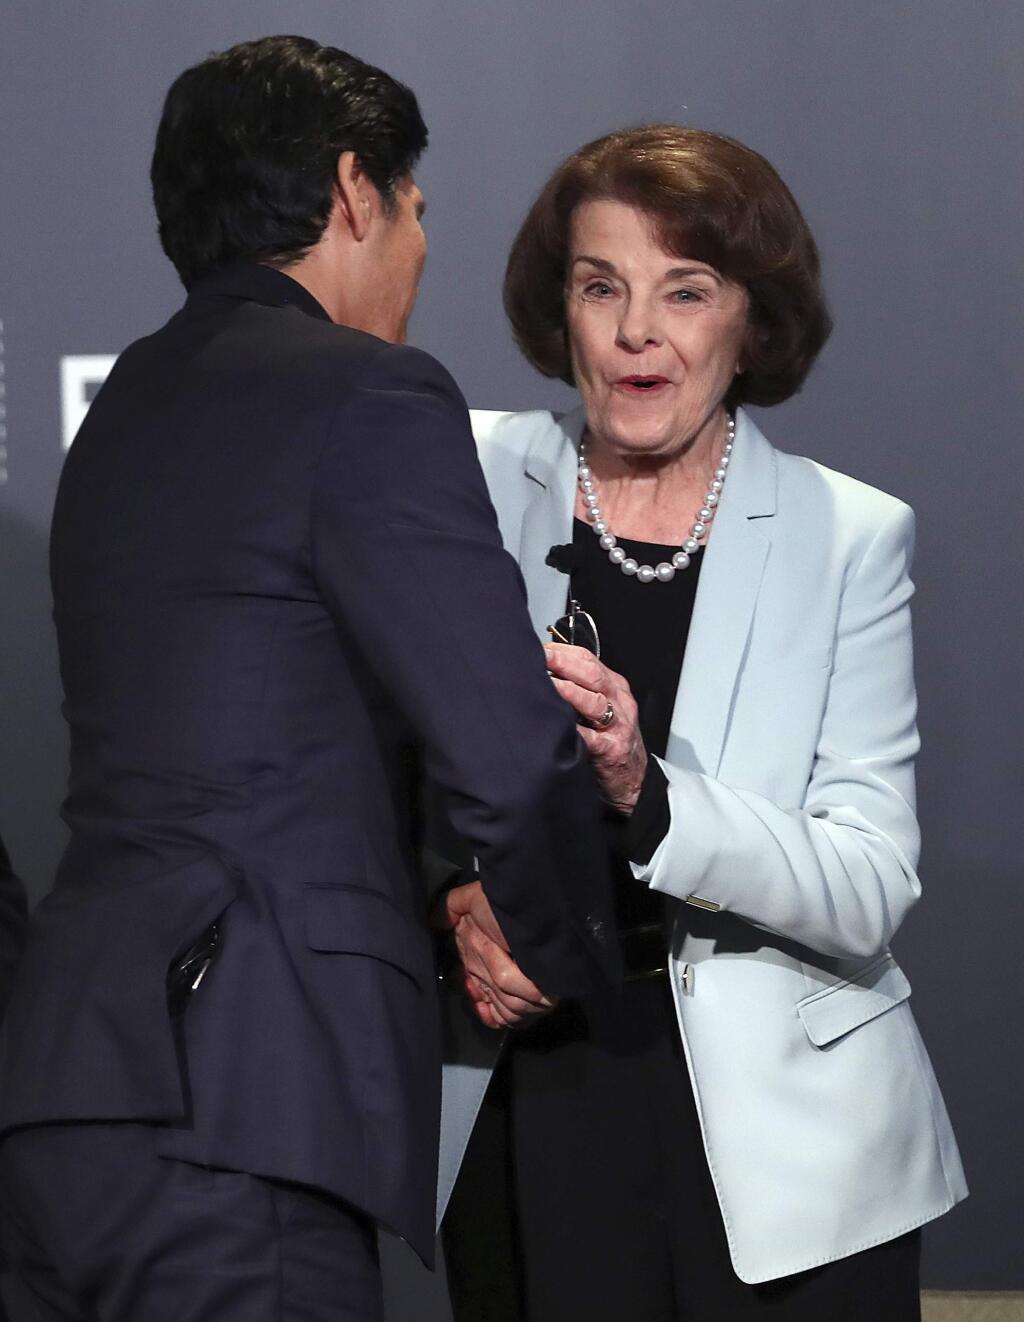 California Sen. Dianne Feinstein, D-Calif., reacts after receiving a kiss from California Sen. Kevin de Leon, D-Los Angeles, after a debate Wednesday, Oct. 17, 2018, in San Francisco. Feinstein shared the stage with an opponent for the first time since 2000 when she debated state Sen. Kevin de Leon.The two Democrats are facing off in the Nov. 6 election. (AP Photo/Ben Margot)